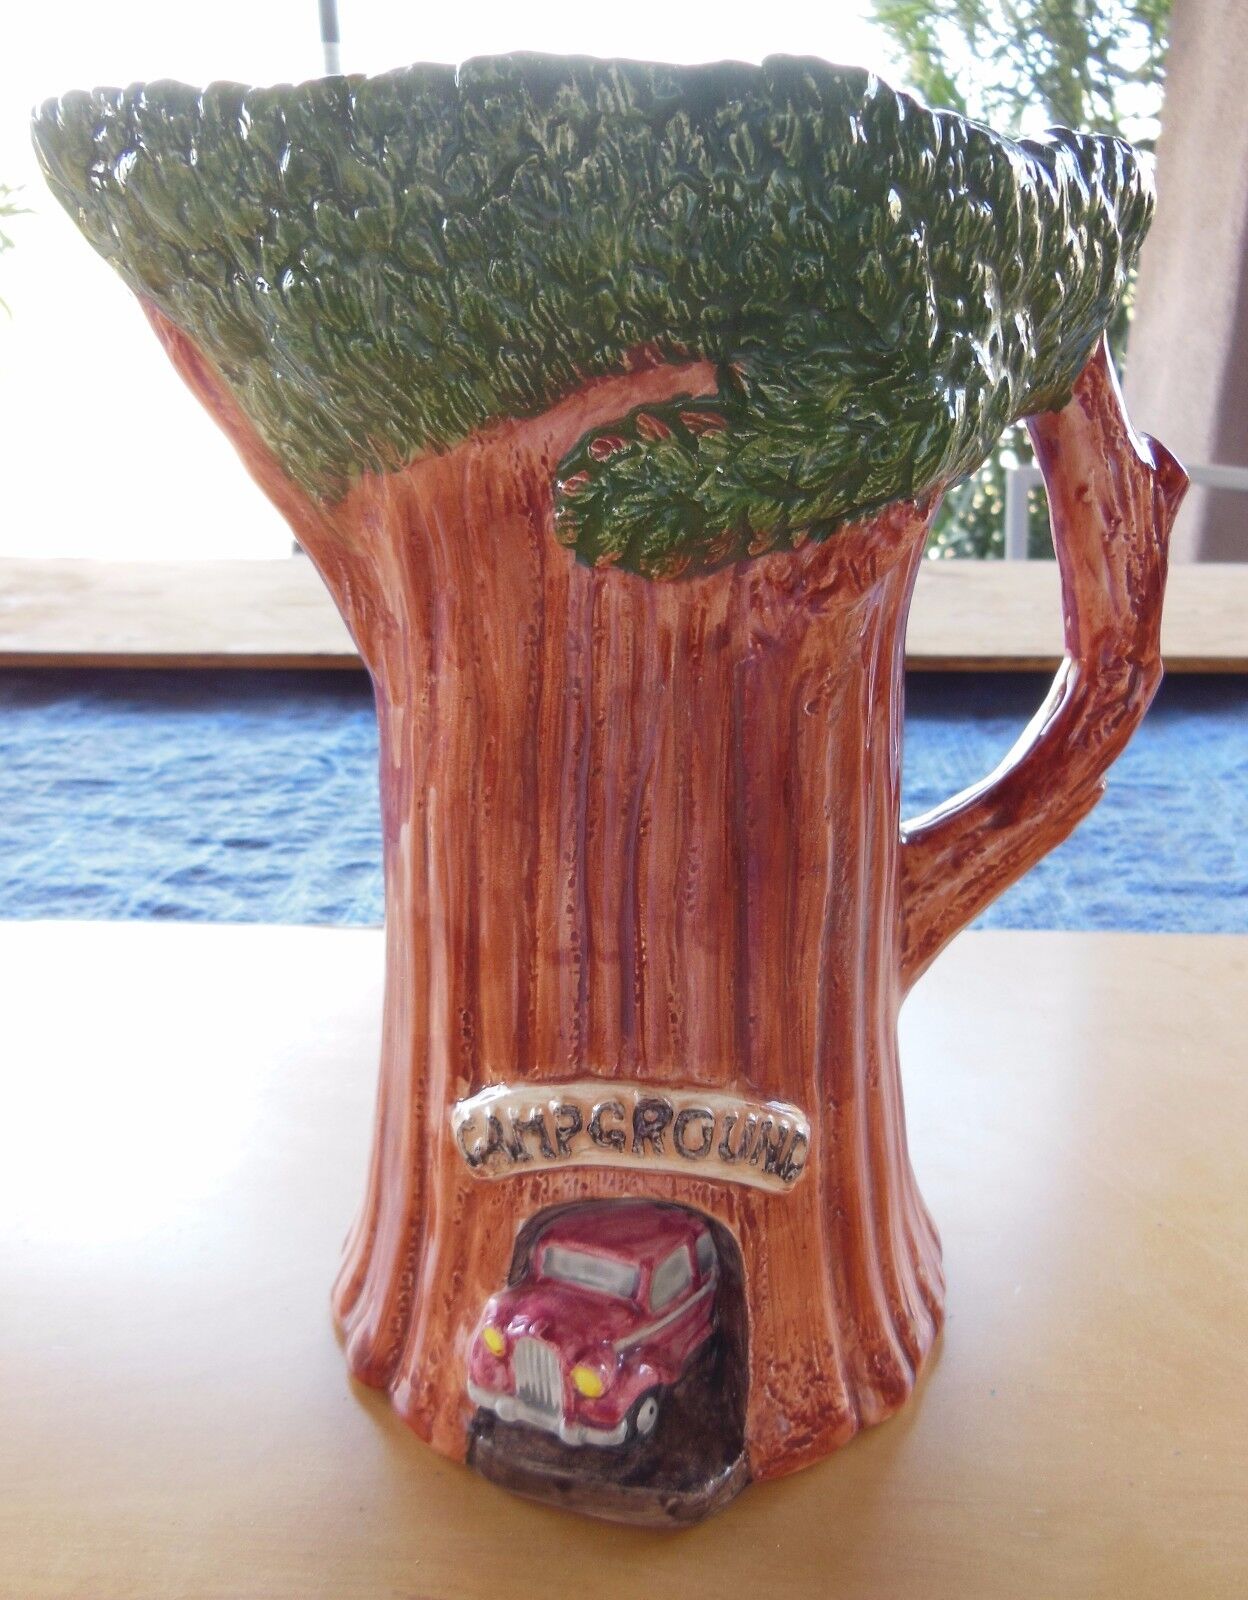 Dept 56 Tree Shaped Pitcher / Vase Campground Sign with Vehicle Emerging - Japan